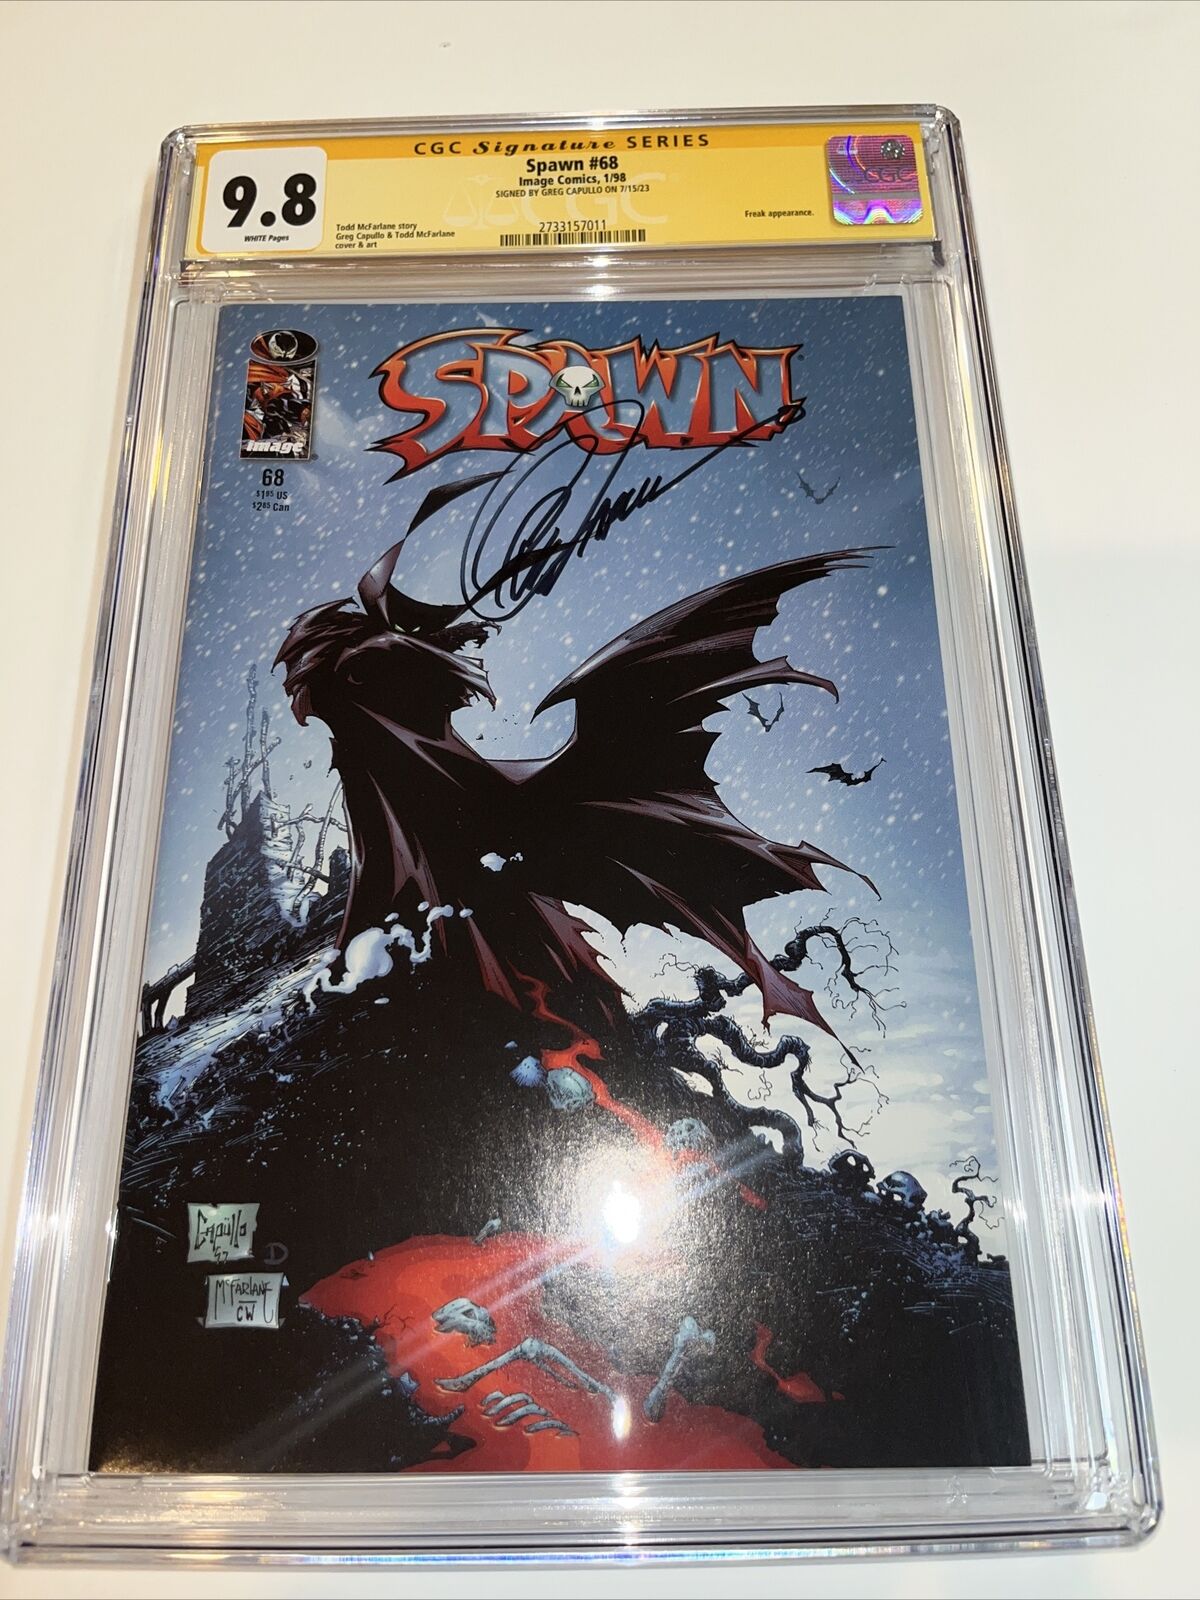 Spawn 229 Sketch Variant - Signed by Todd McFarlane - CGC 9.8, CGC -  Signature Series (Yellow) - 9.8 - in Turtle88's CGC Collection